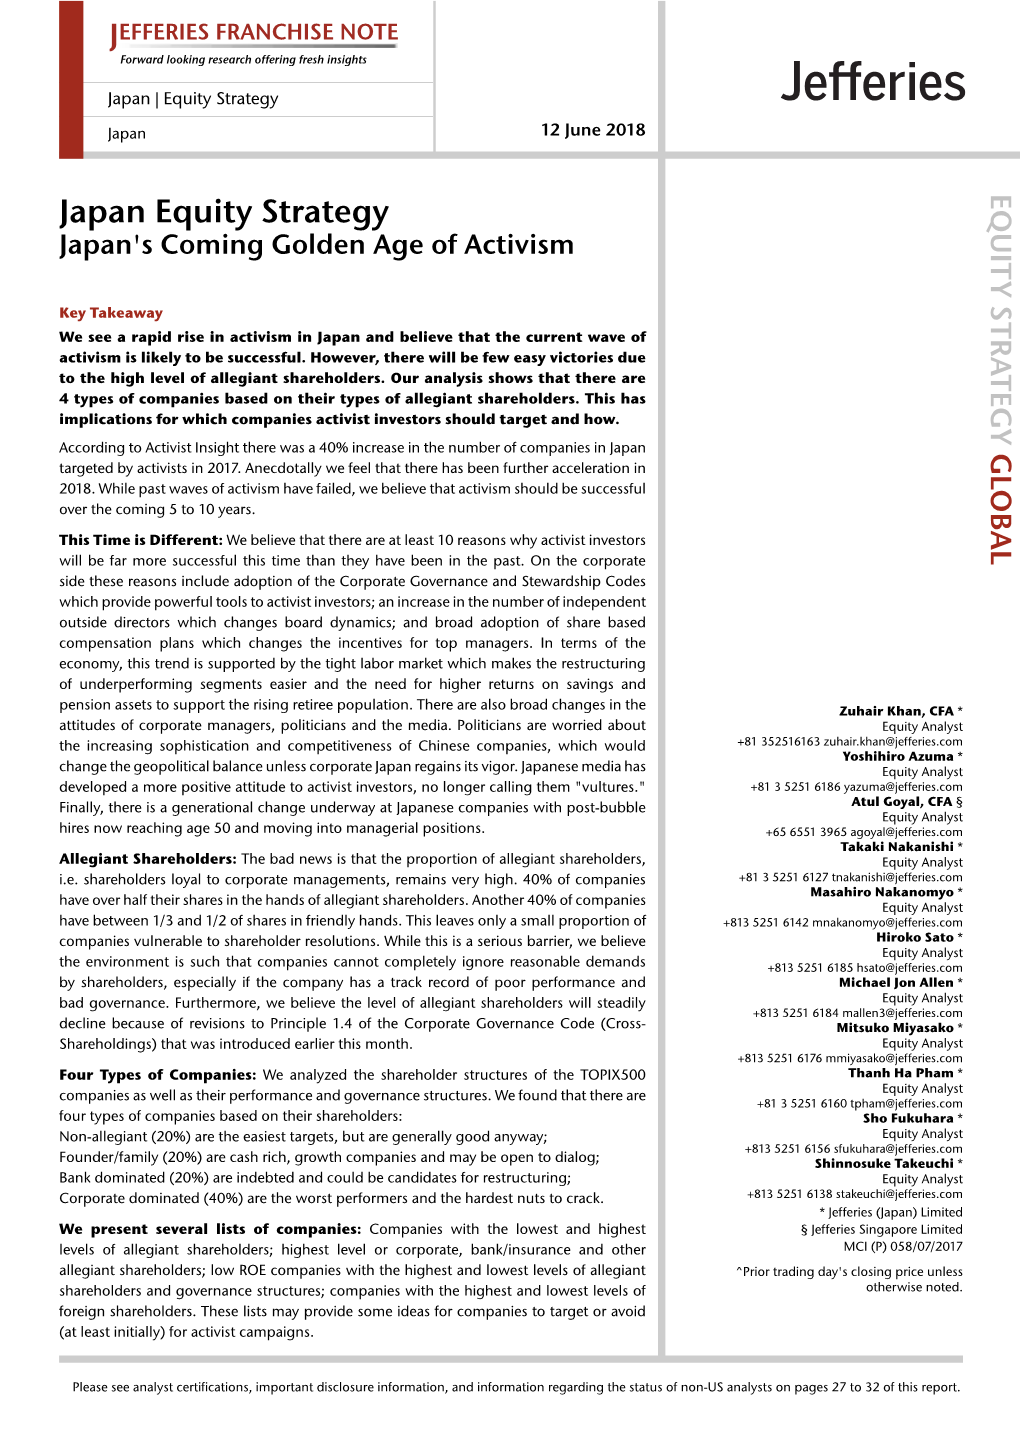 Japan Equity Strategy Japan's Coming Golden Age of Activism